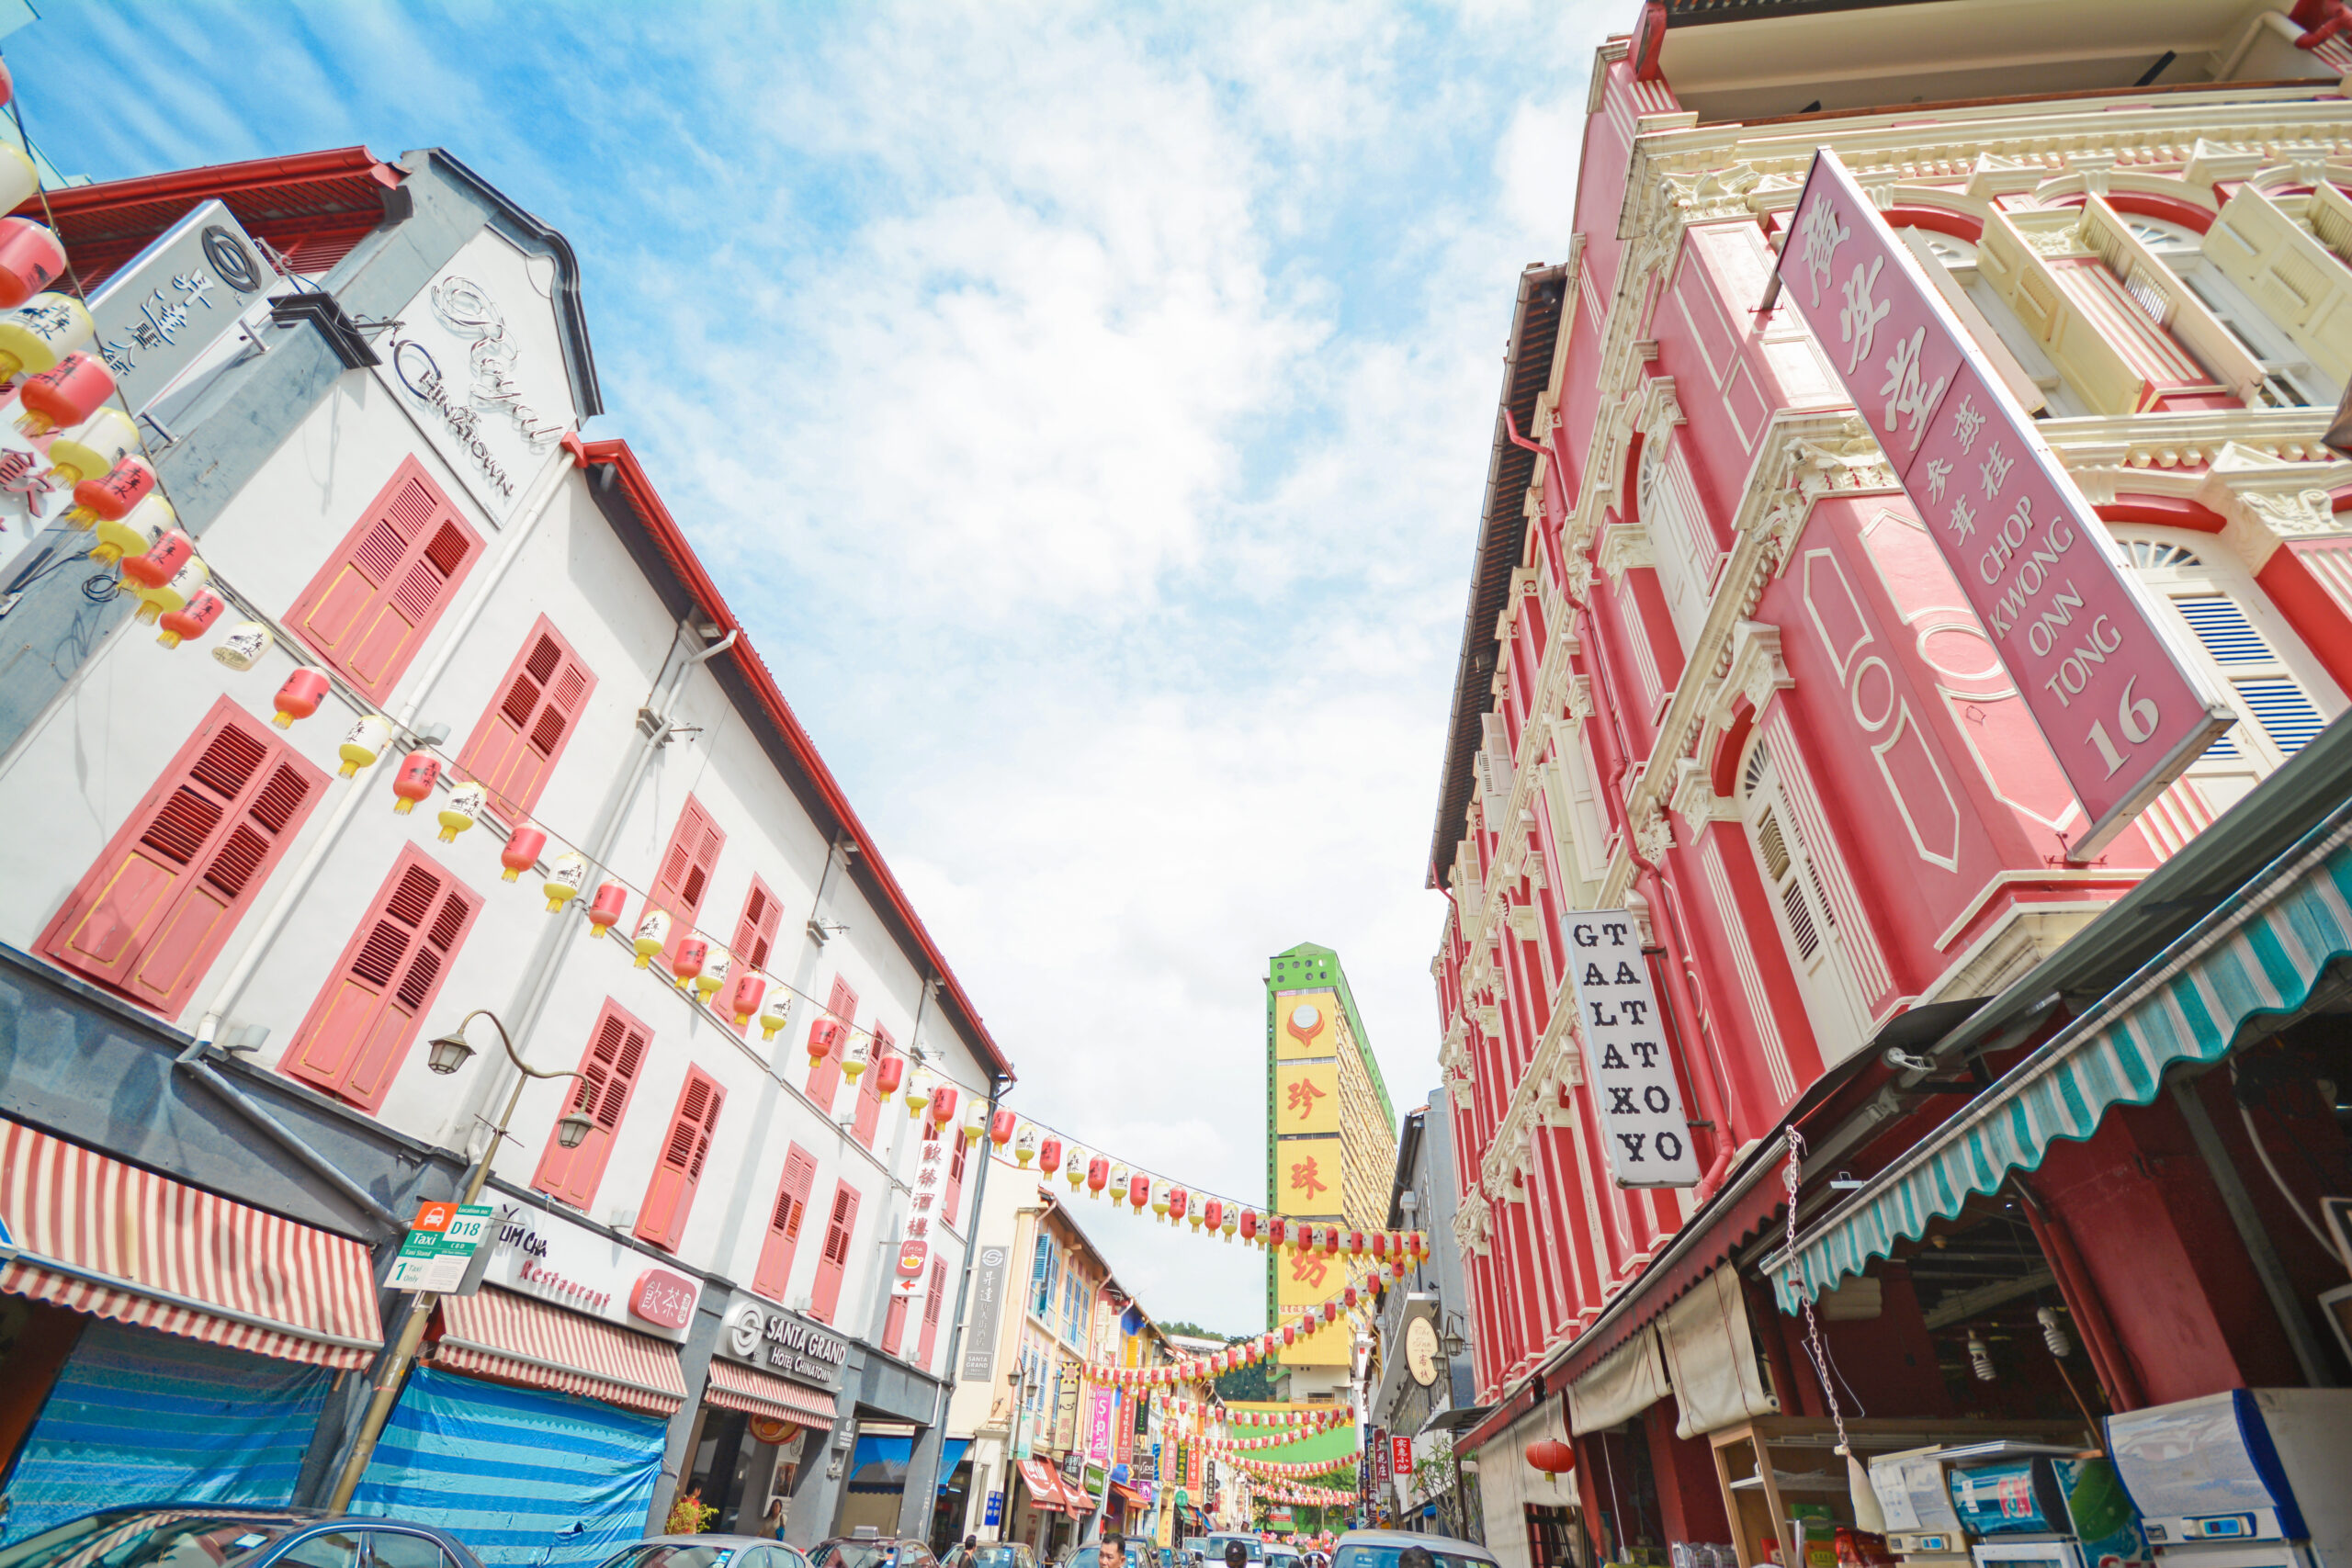 A panoramic shot of a stretch of shophouses with lantern decor in Chinatown